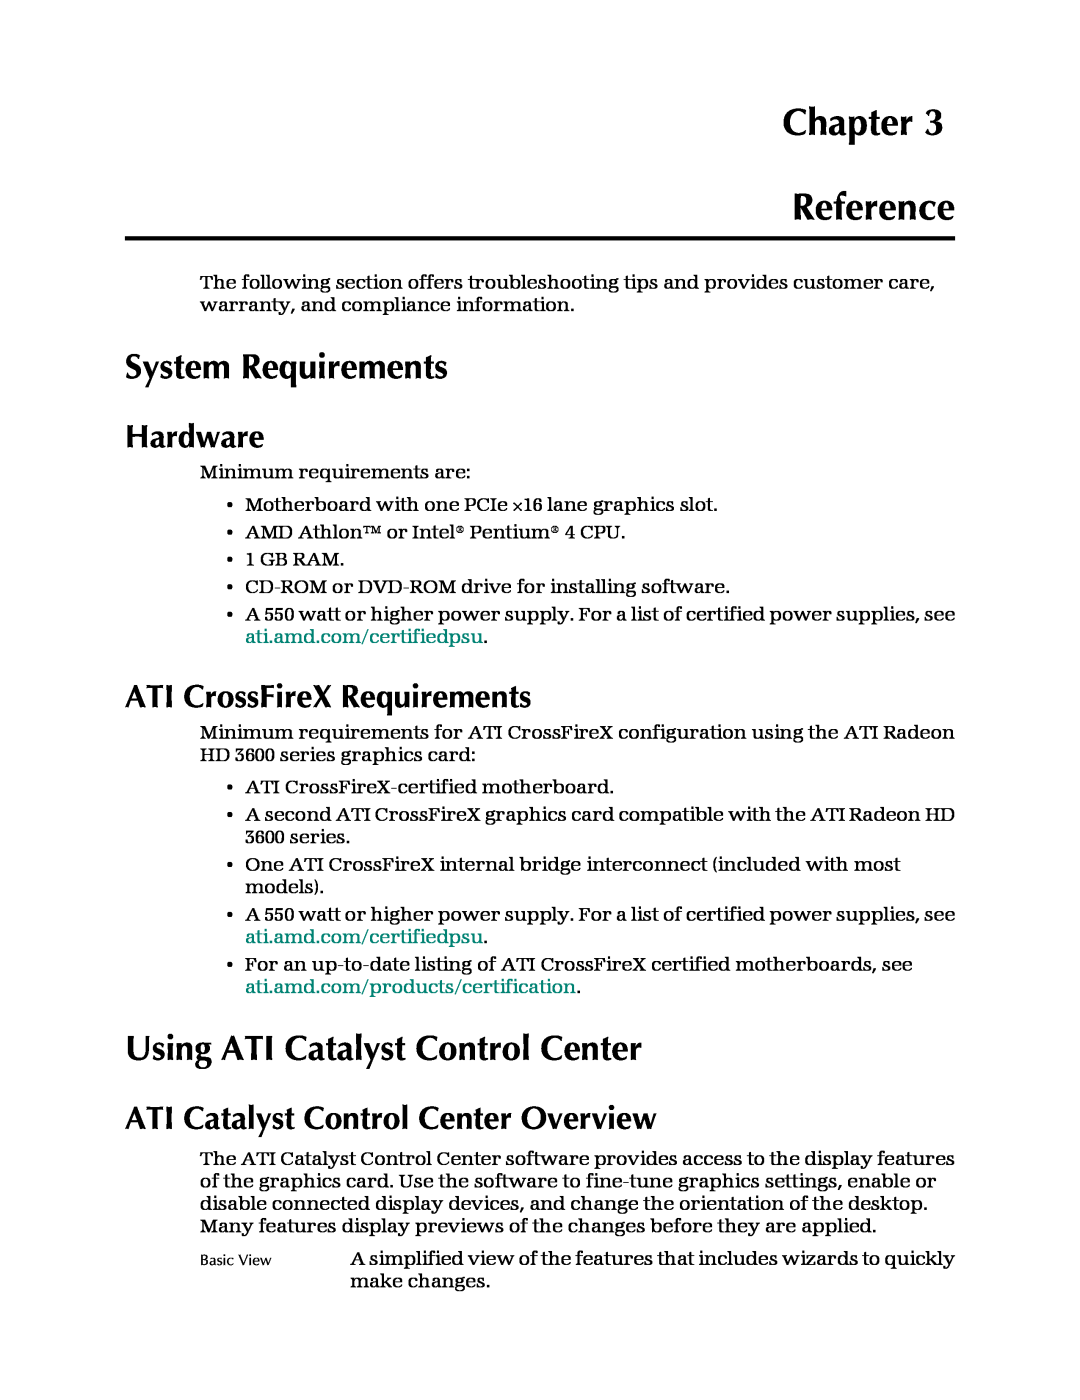 AMD 3600 Chapter Reference, System Requirements, Using ATI Catalyst Control Center, Hardware, ATI CrossFireX Requirements 